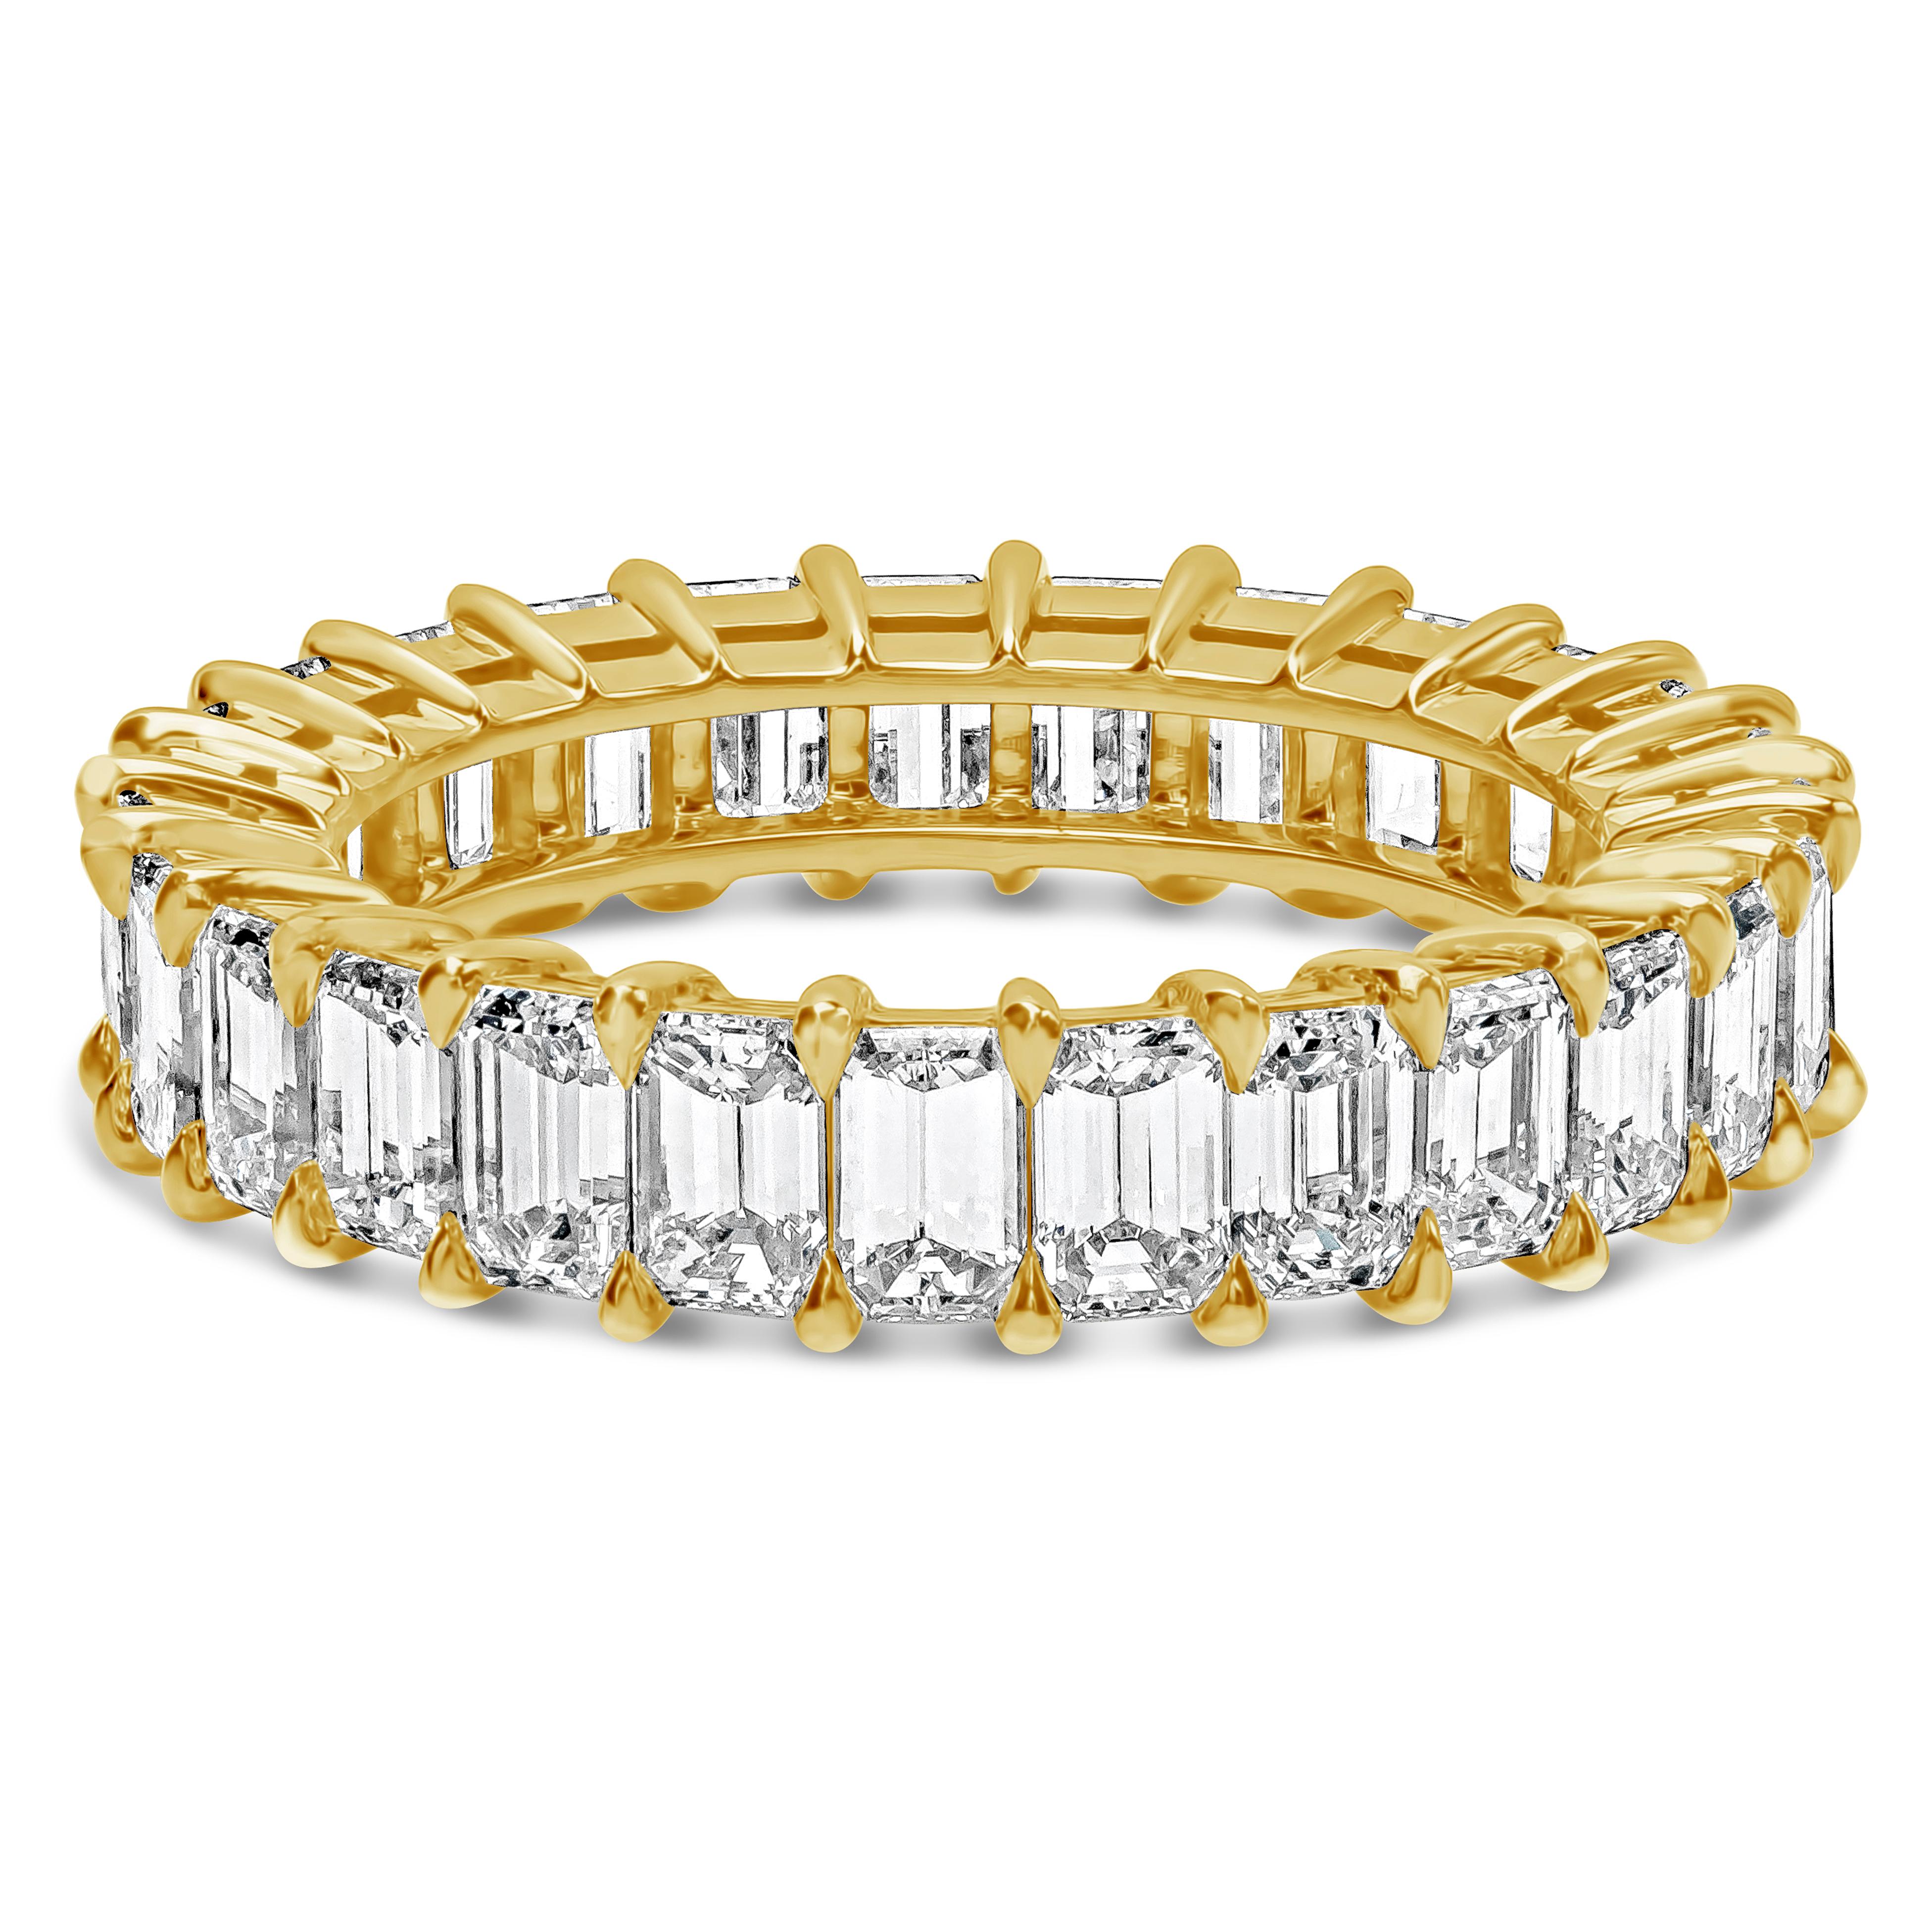 A classic eternity wedding band style showcasing a row of emerald cut diamonds weighing 4.15 carats total, G Color and VS in Clarity. Set in a timeless shared-prong setting, Made with 18K Yellow Gold, size 6.5 US.

Roman Malakov is a custom house,